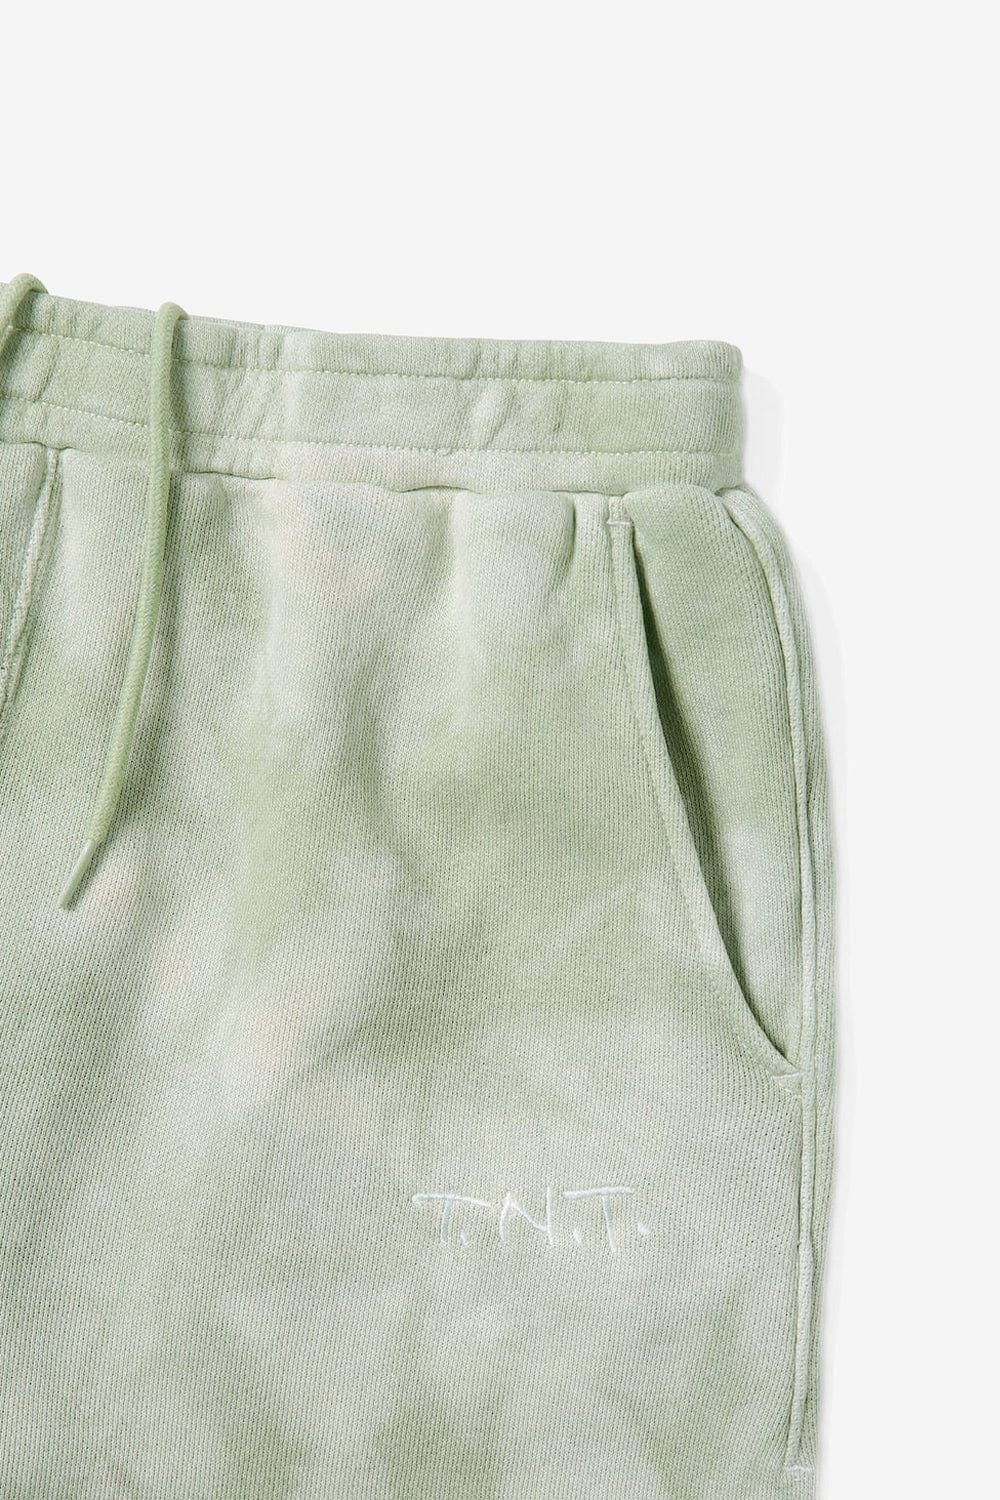 Thisisneverthat Uneven Dyed Sweatpant (Light Sage) - Commonwealth